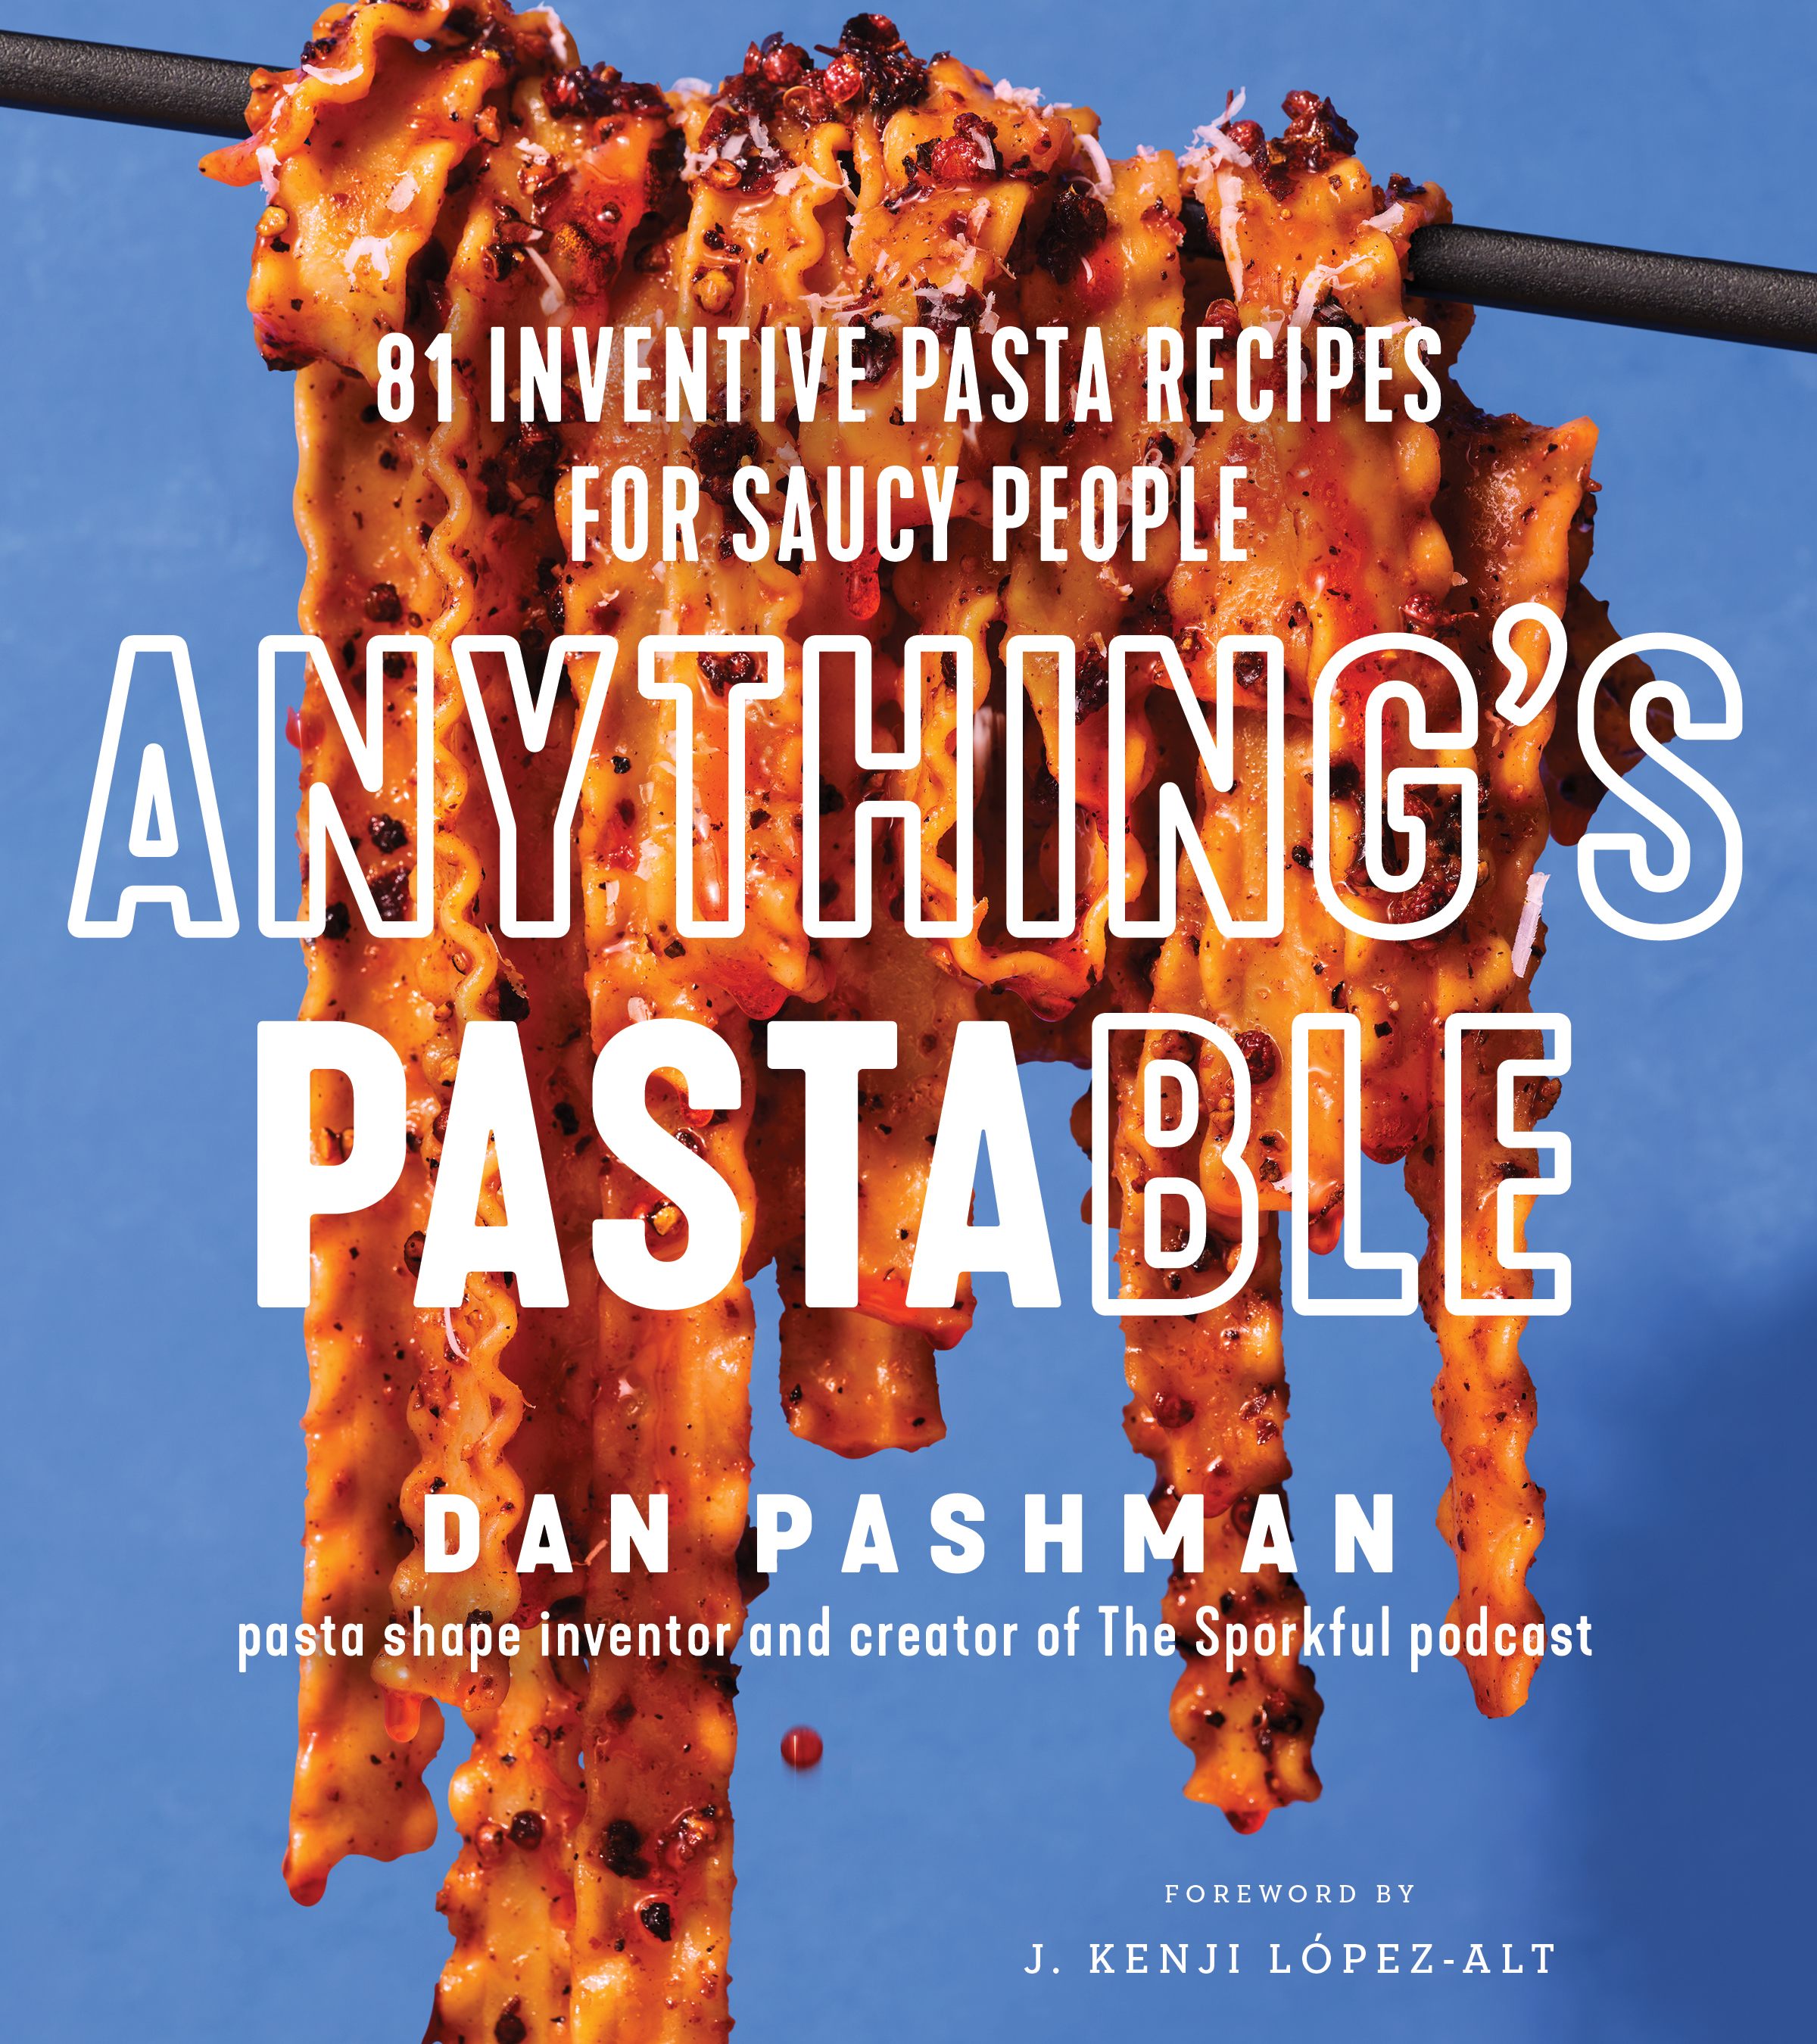 Dan Pashman's first cookbook <em>Anything's Pastable</em> takes a different approach to pasta recipes.